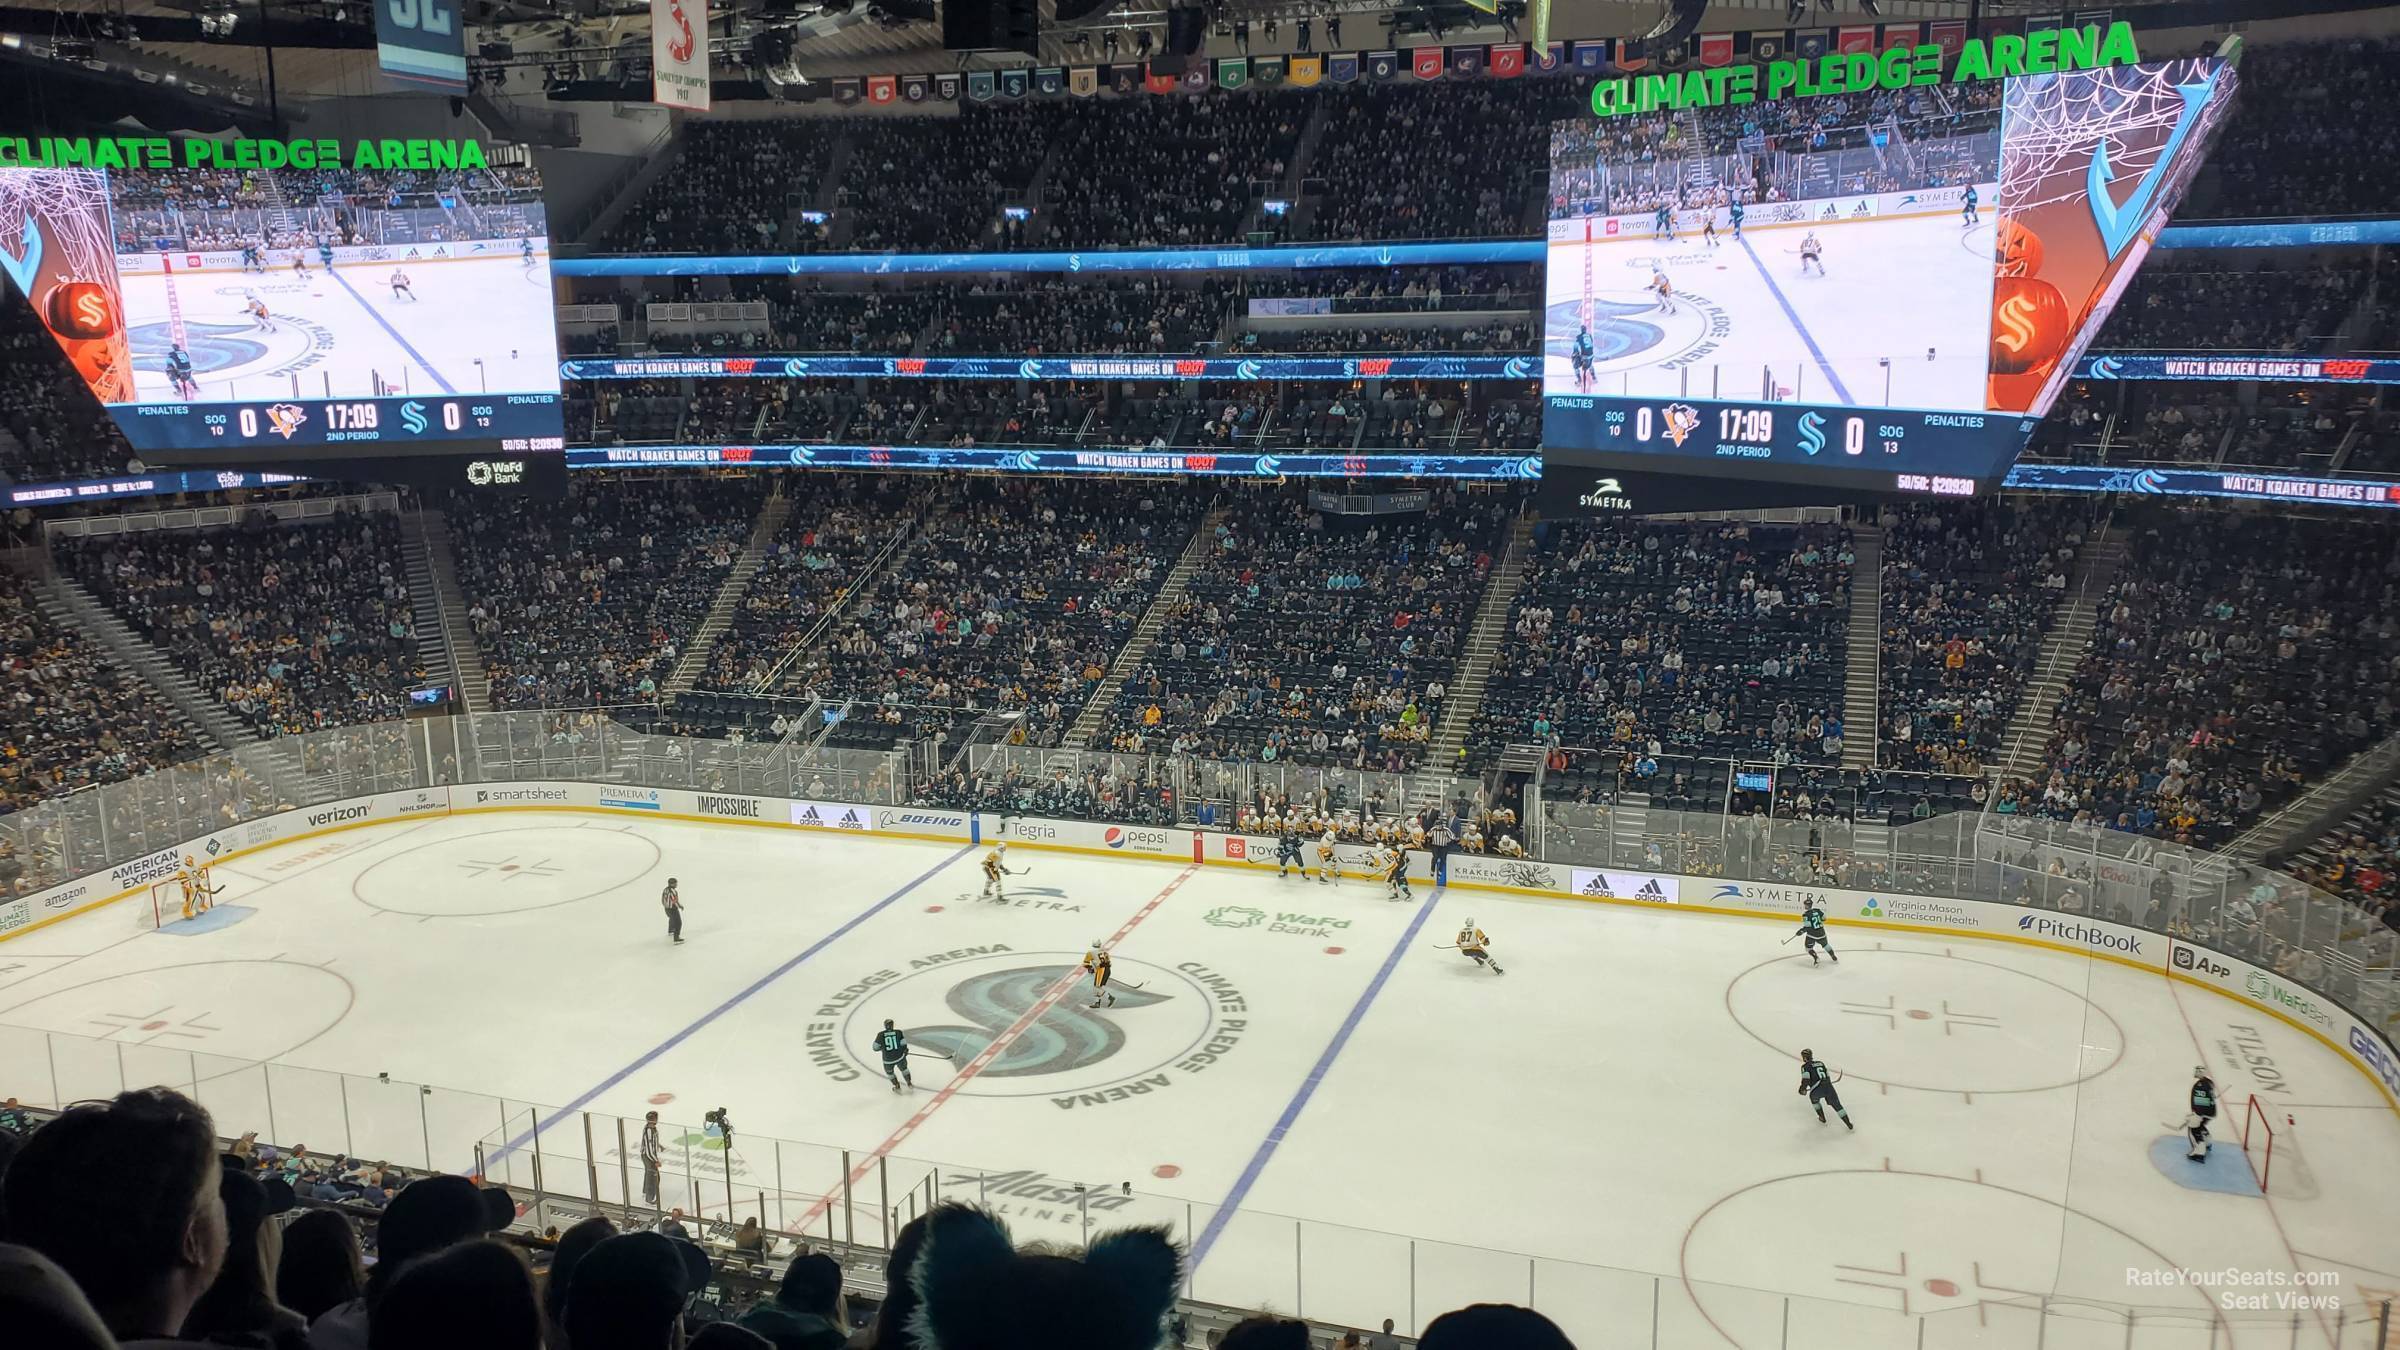 section 113, row bar seat view  for hockey - climate pledge arena